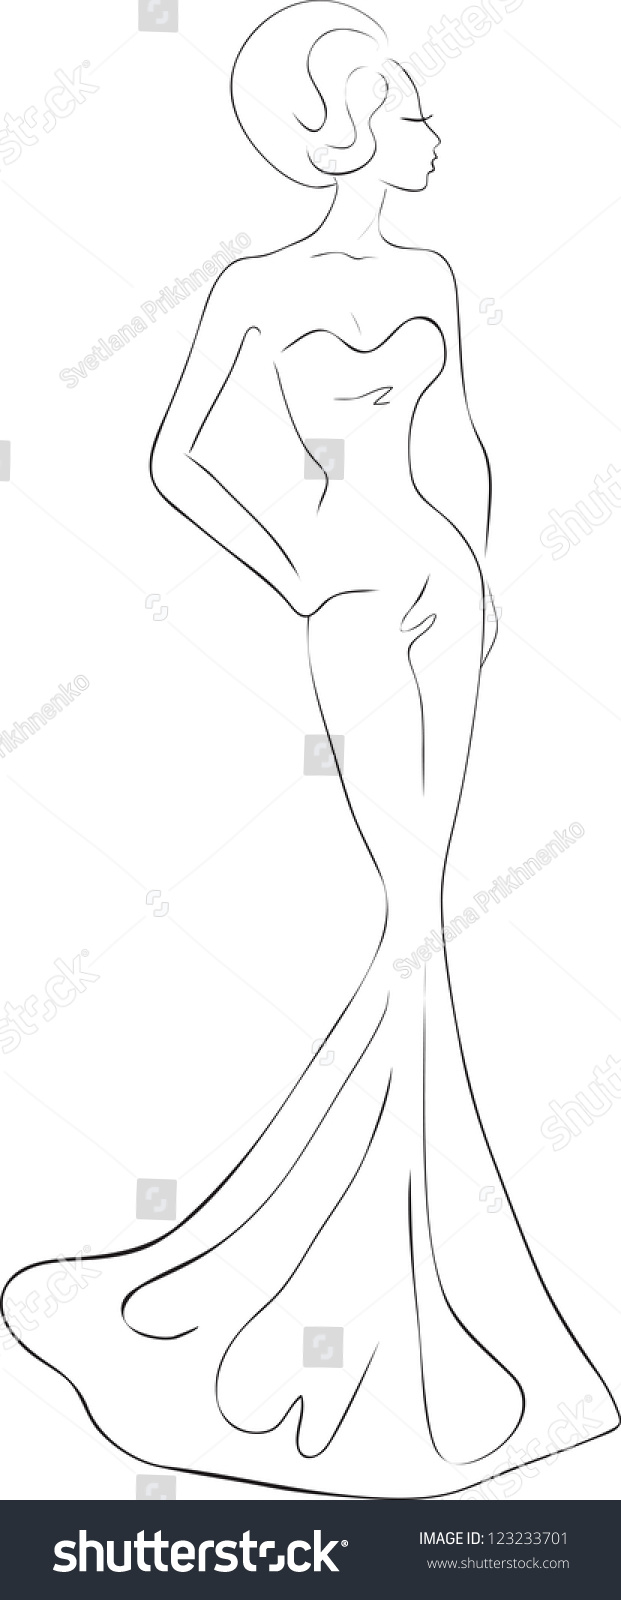 Fashion Sketch Of Woman In Evening Maxi Dress Stock Vector Illustration ...